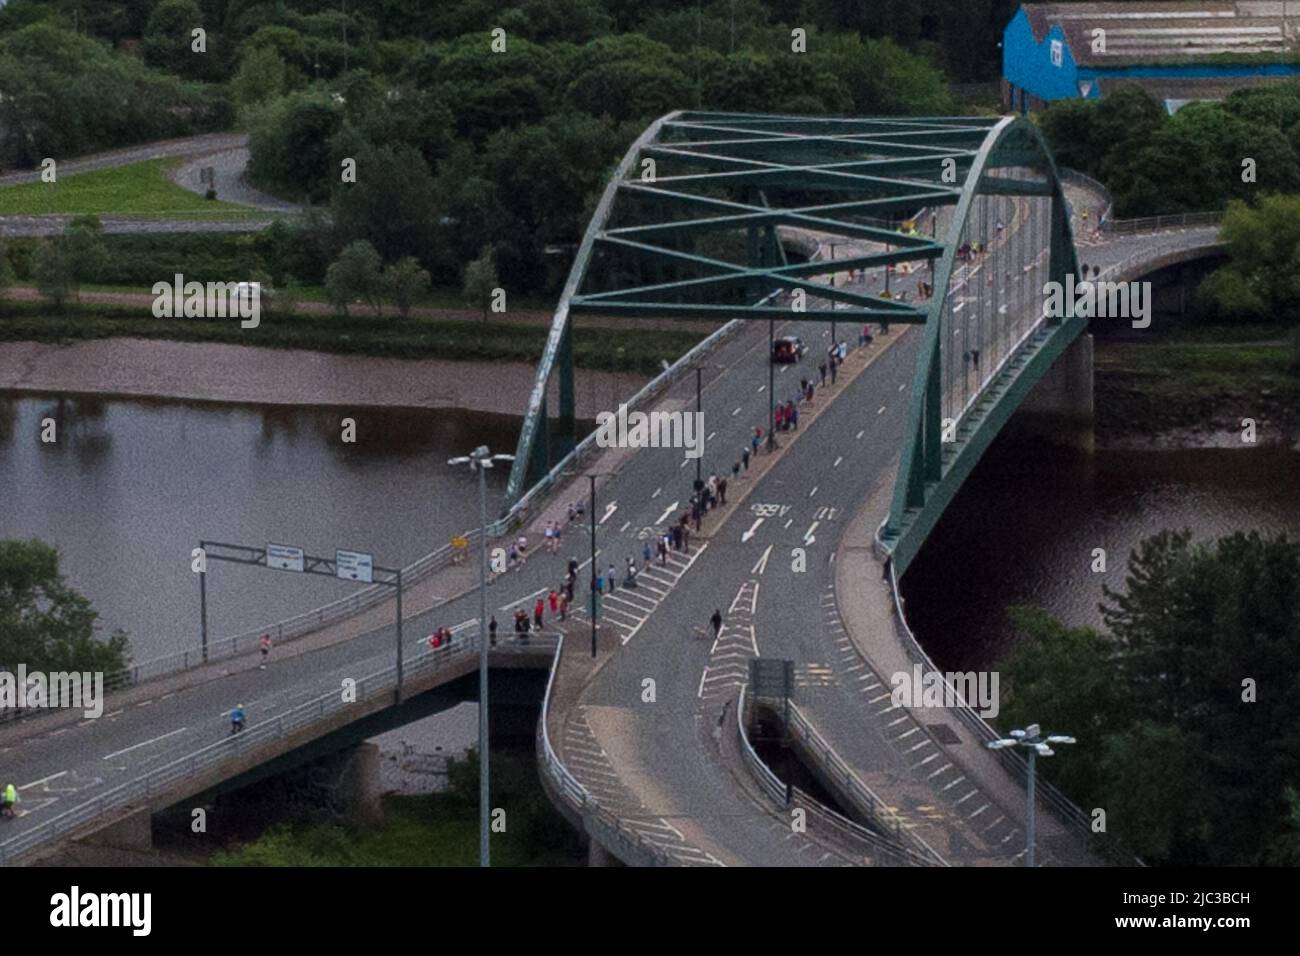 Blaydon, England, 9 June 2022. Aerial view of lead runners crossing the River Tyne on Scotswood Bridge during the annual Blaydon race from Newcastle to Blaydon. Credit: Colin Edwards/Alamy Live News. Stock Photo